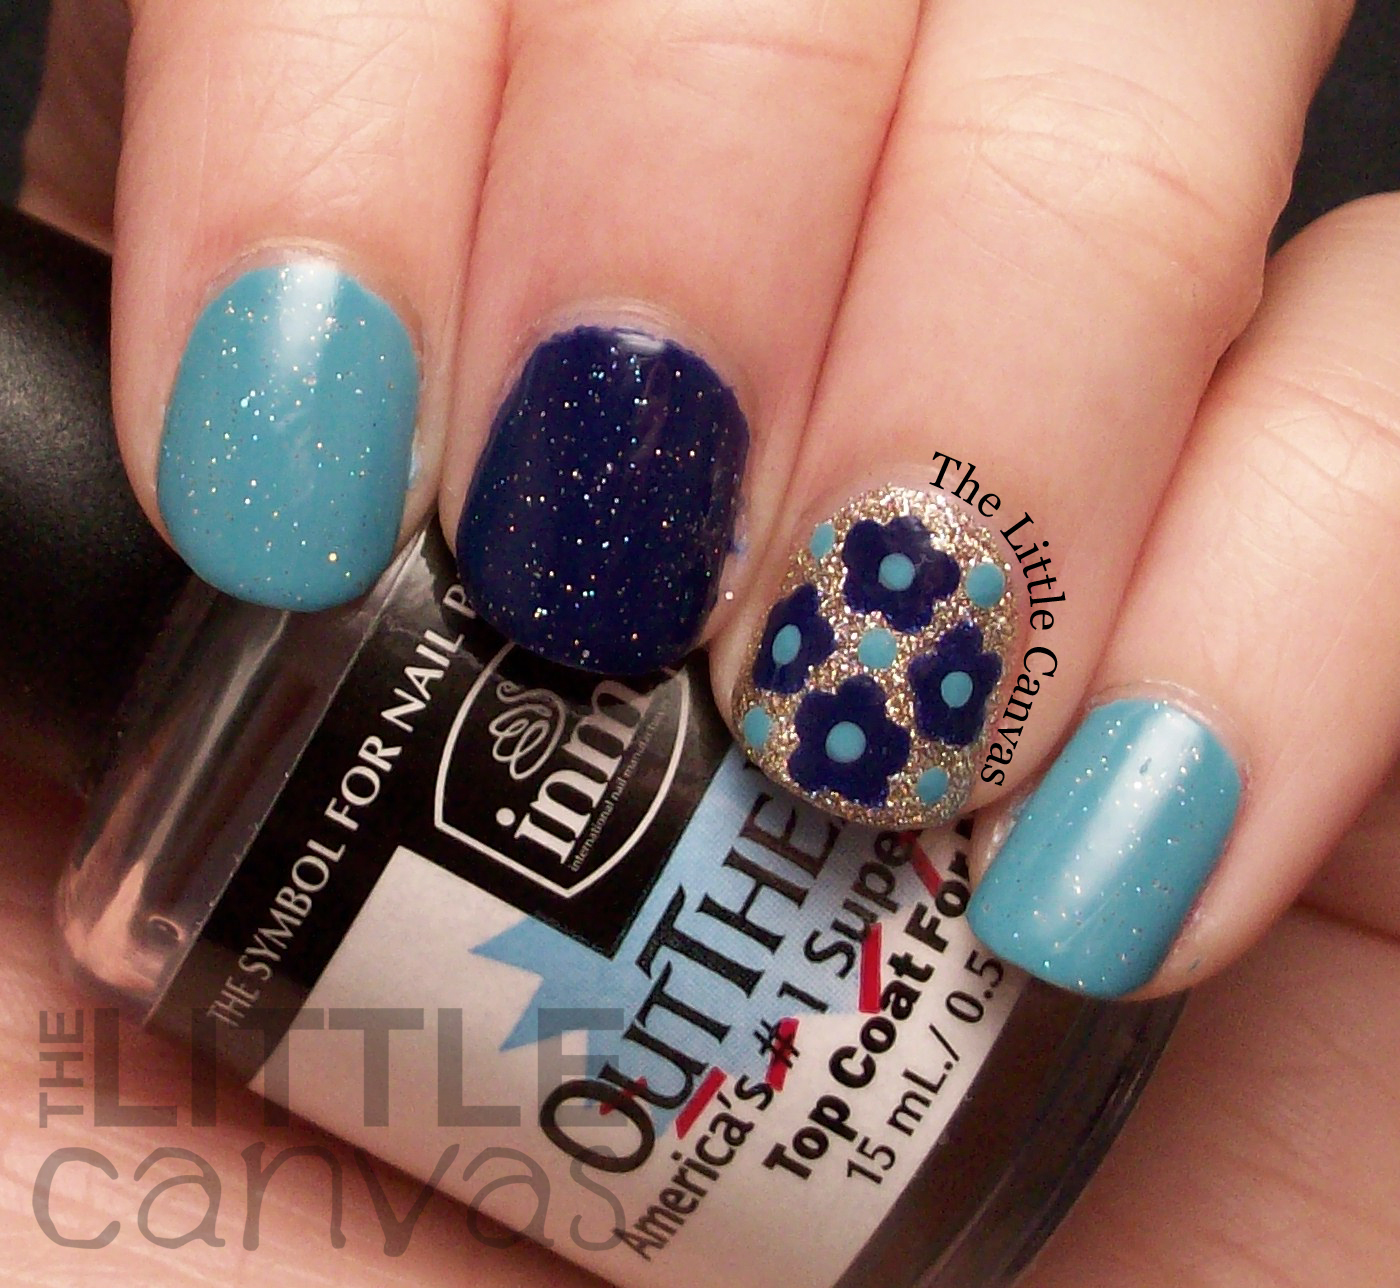 Twinsie Tuesday - Favorite Glitter Polish Topper - The Little Canvas